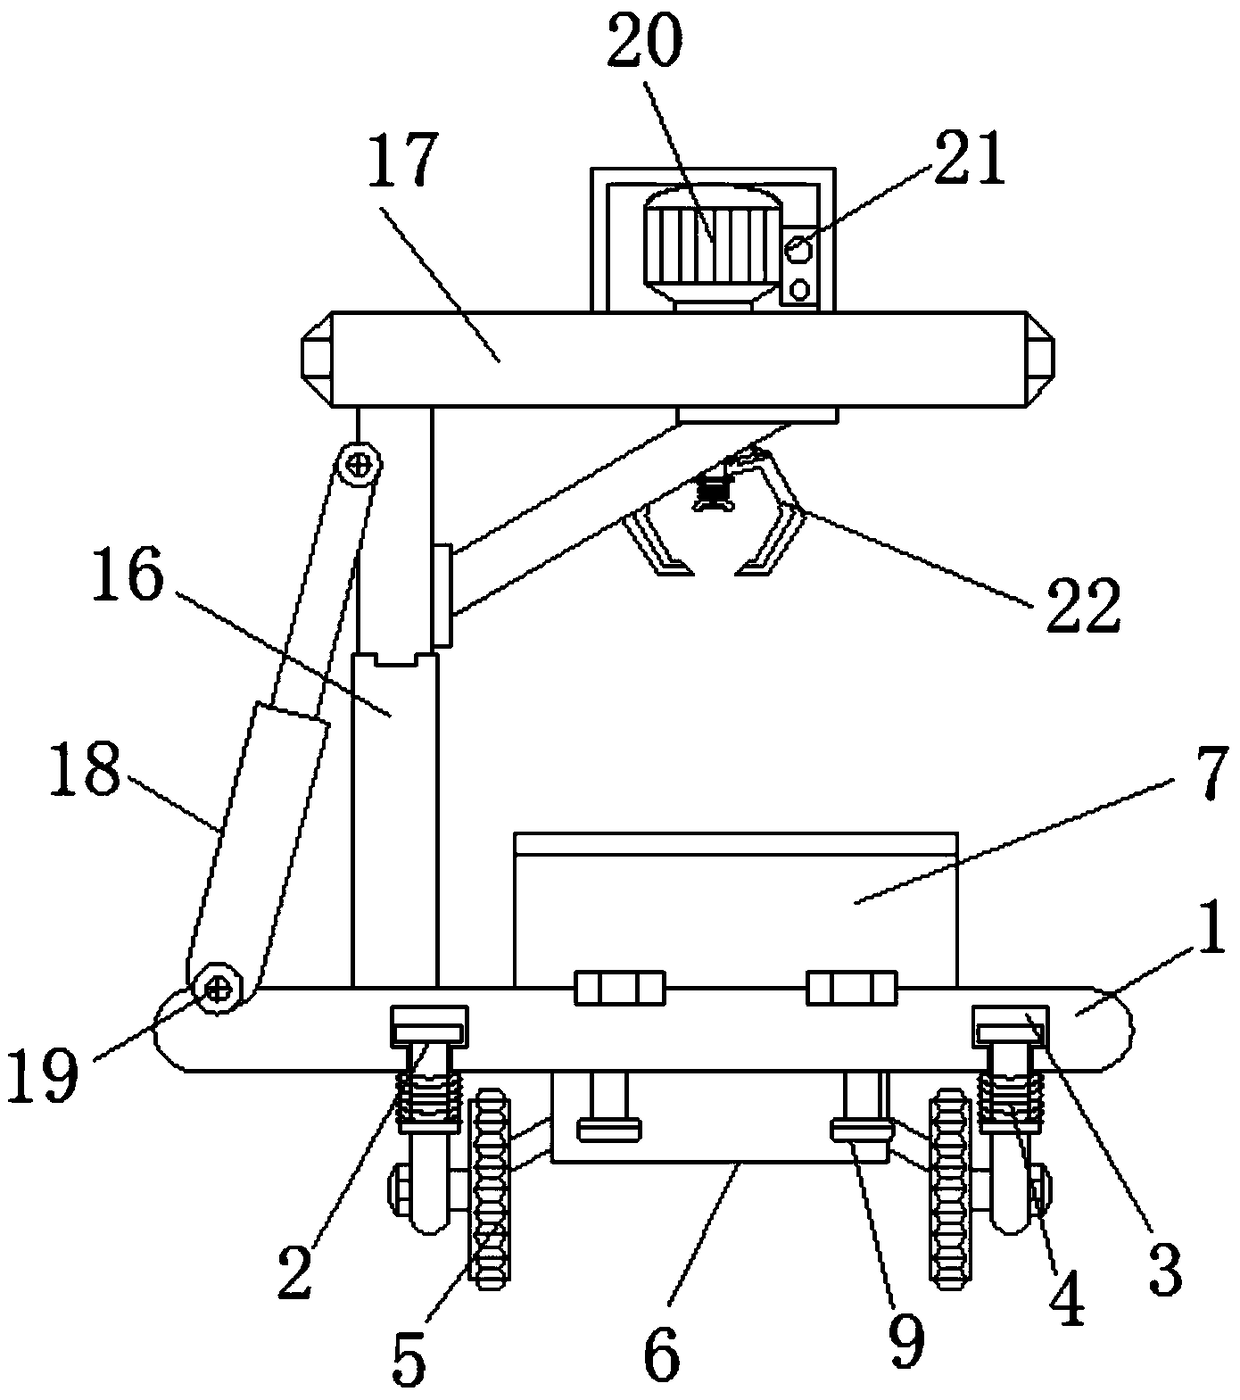 Mounting device for electromechanical equipment convenient for outdoor use